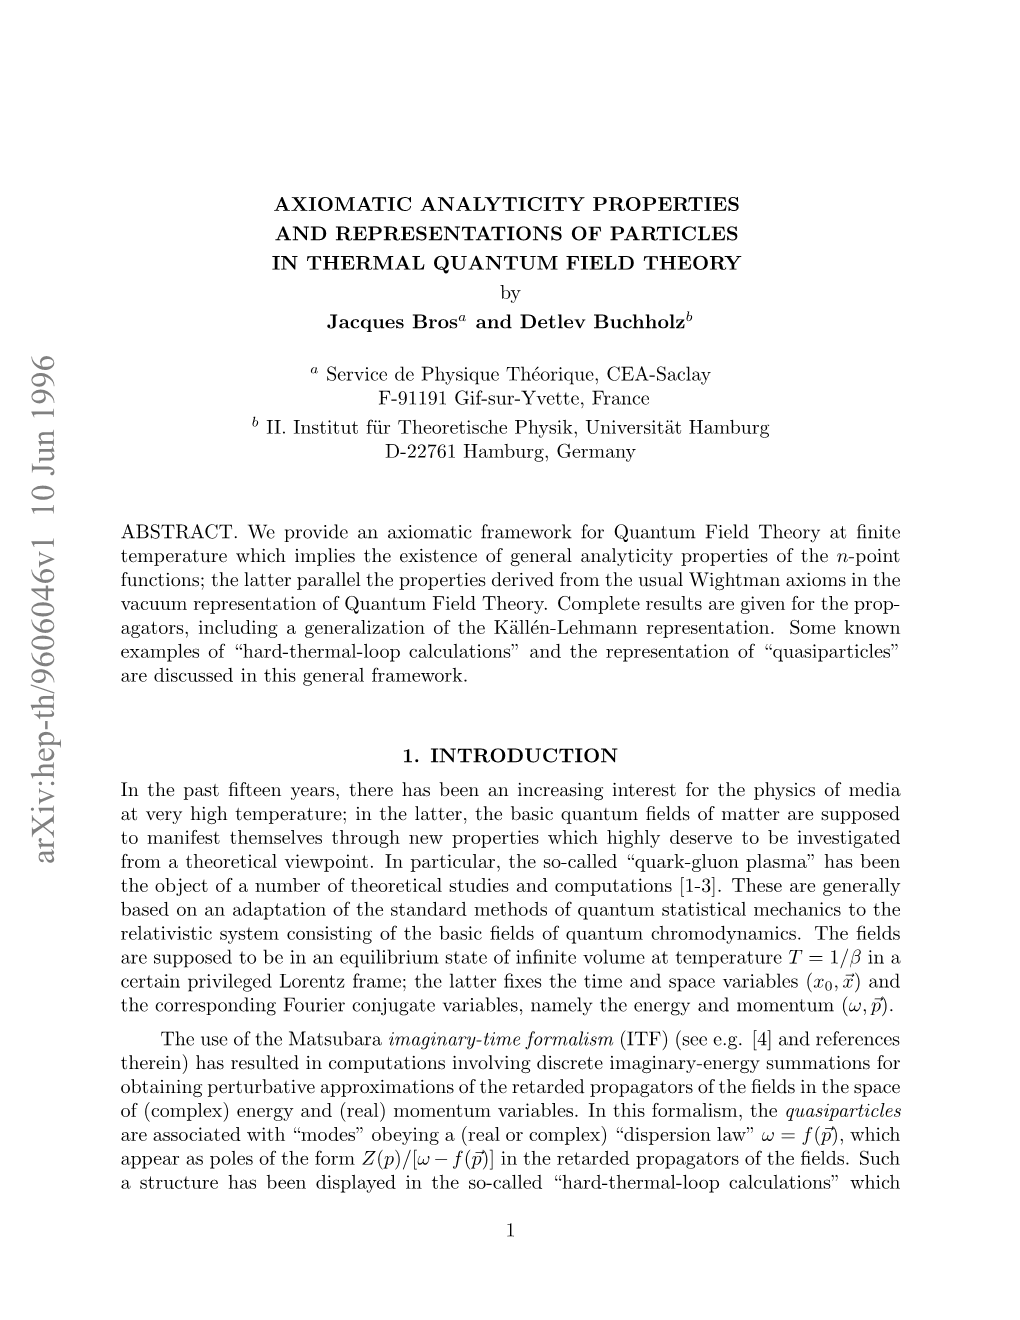 Axiomatic Analyticity Properties and Representations of Particles In